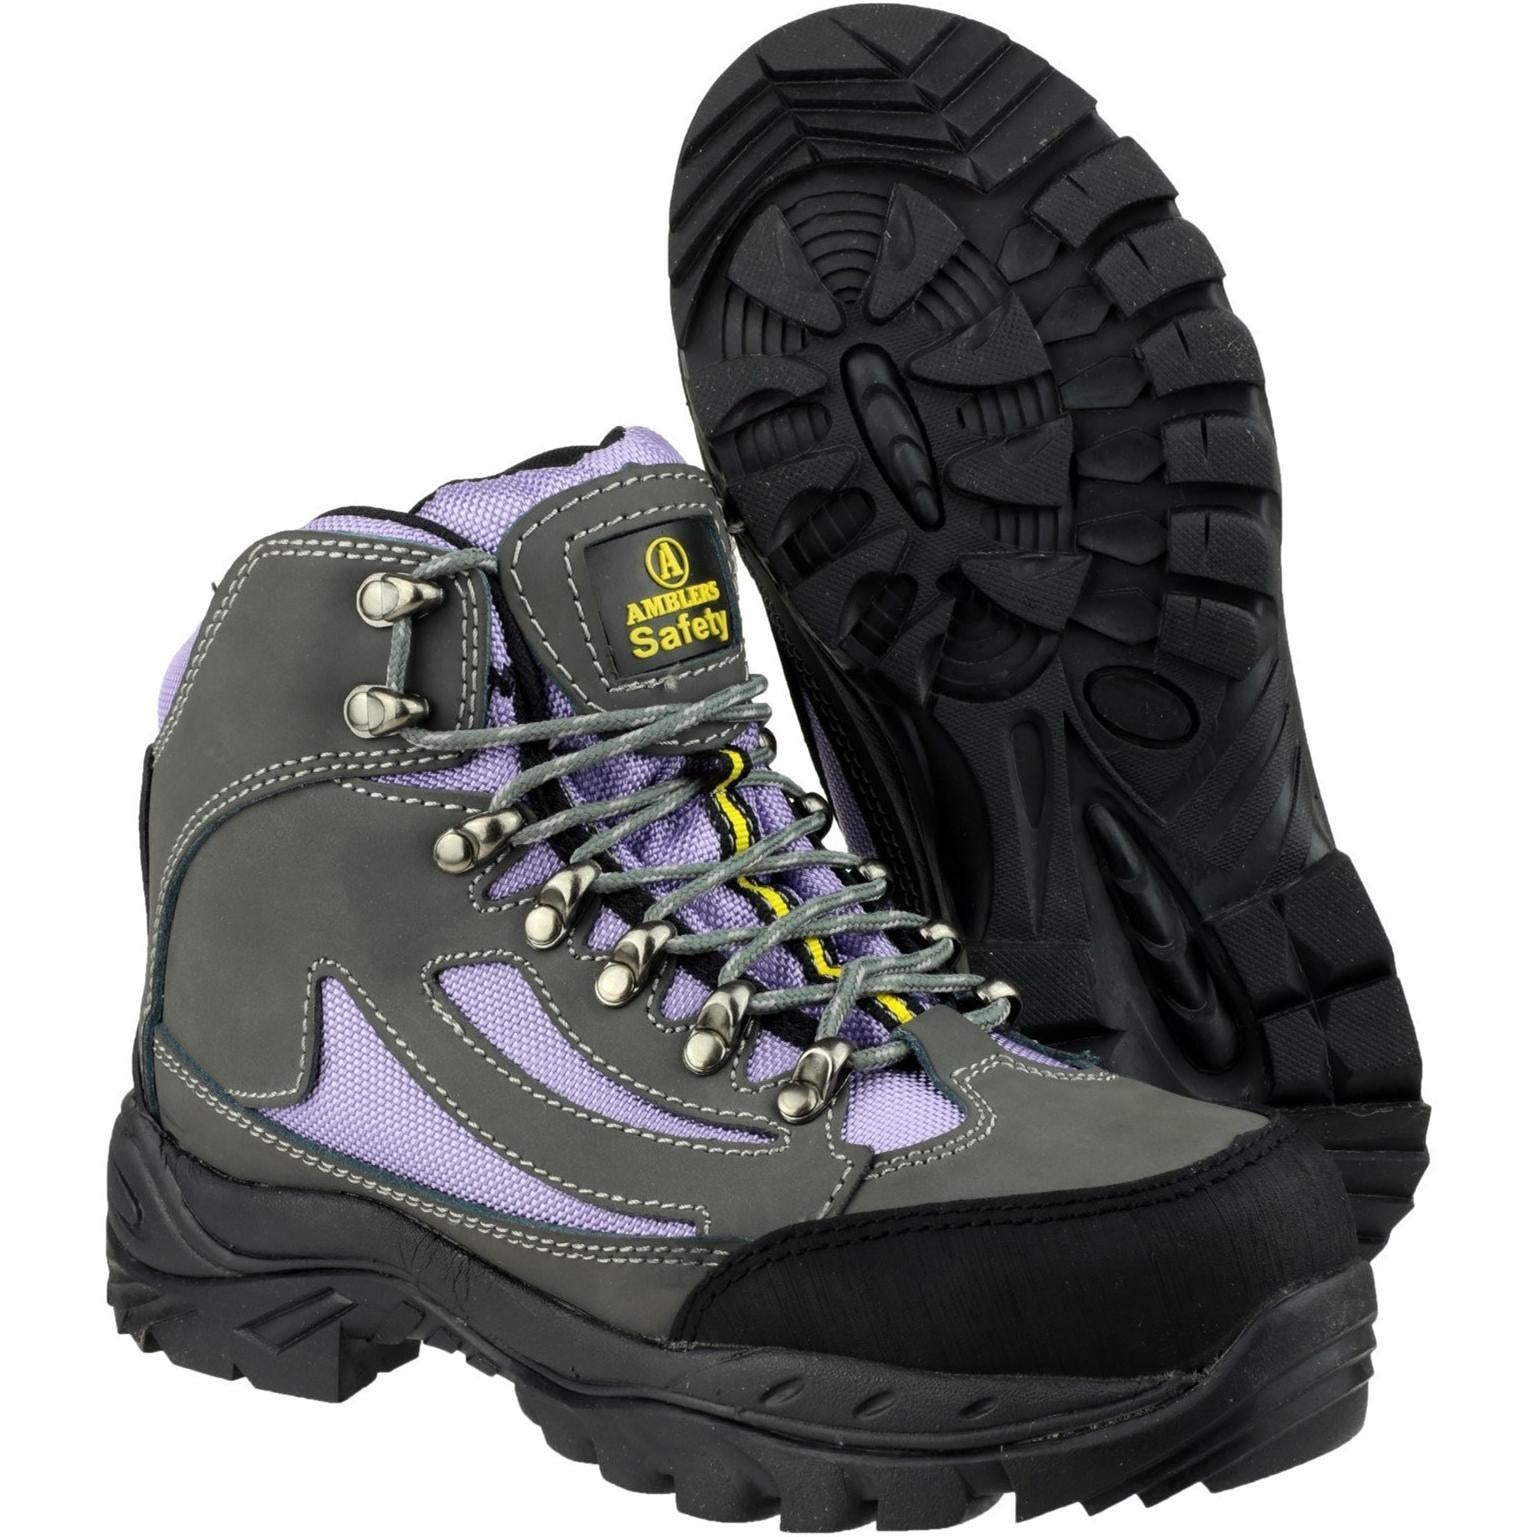 Amblers Steel FS91 Hardwearing Lace up Hiker Safety Boot